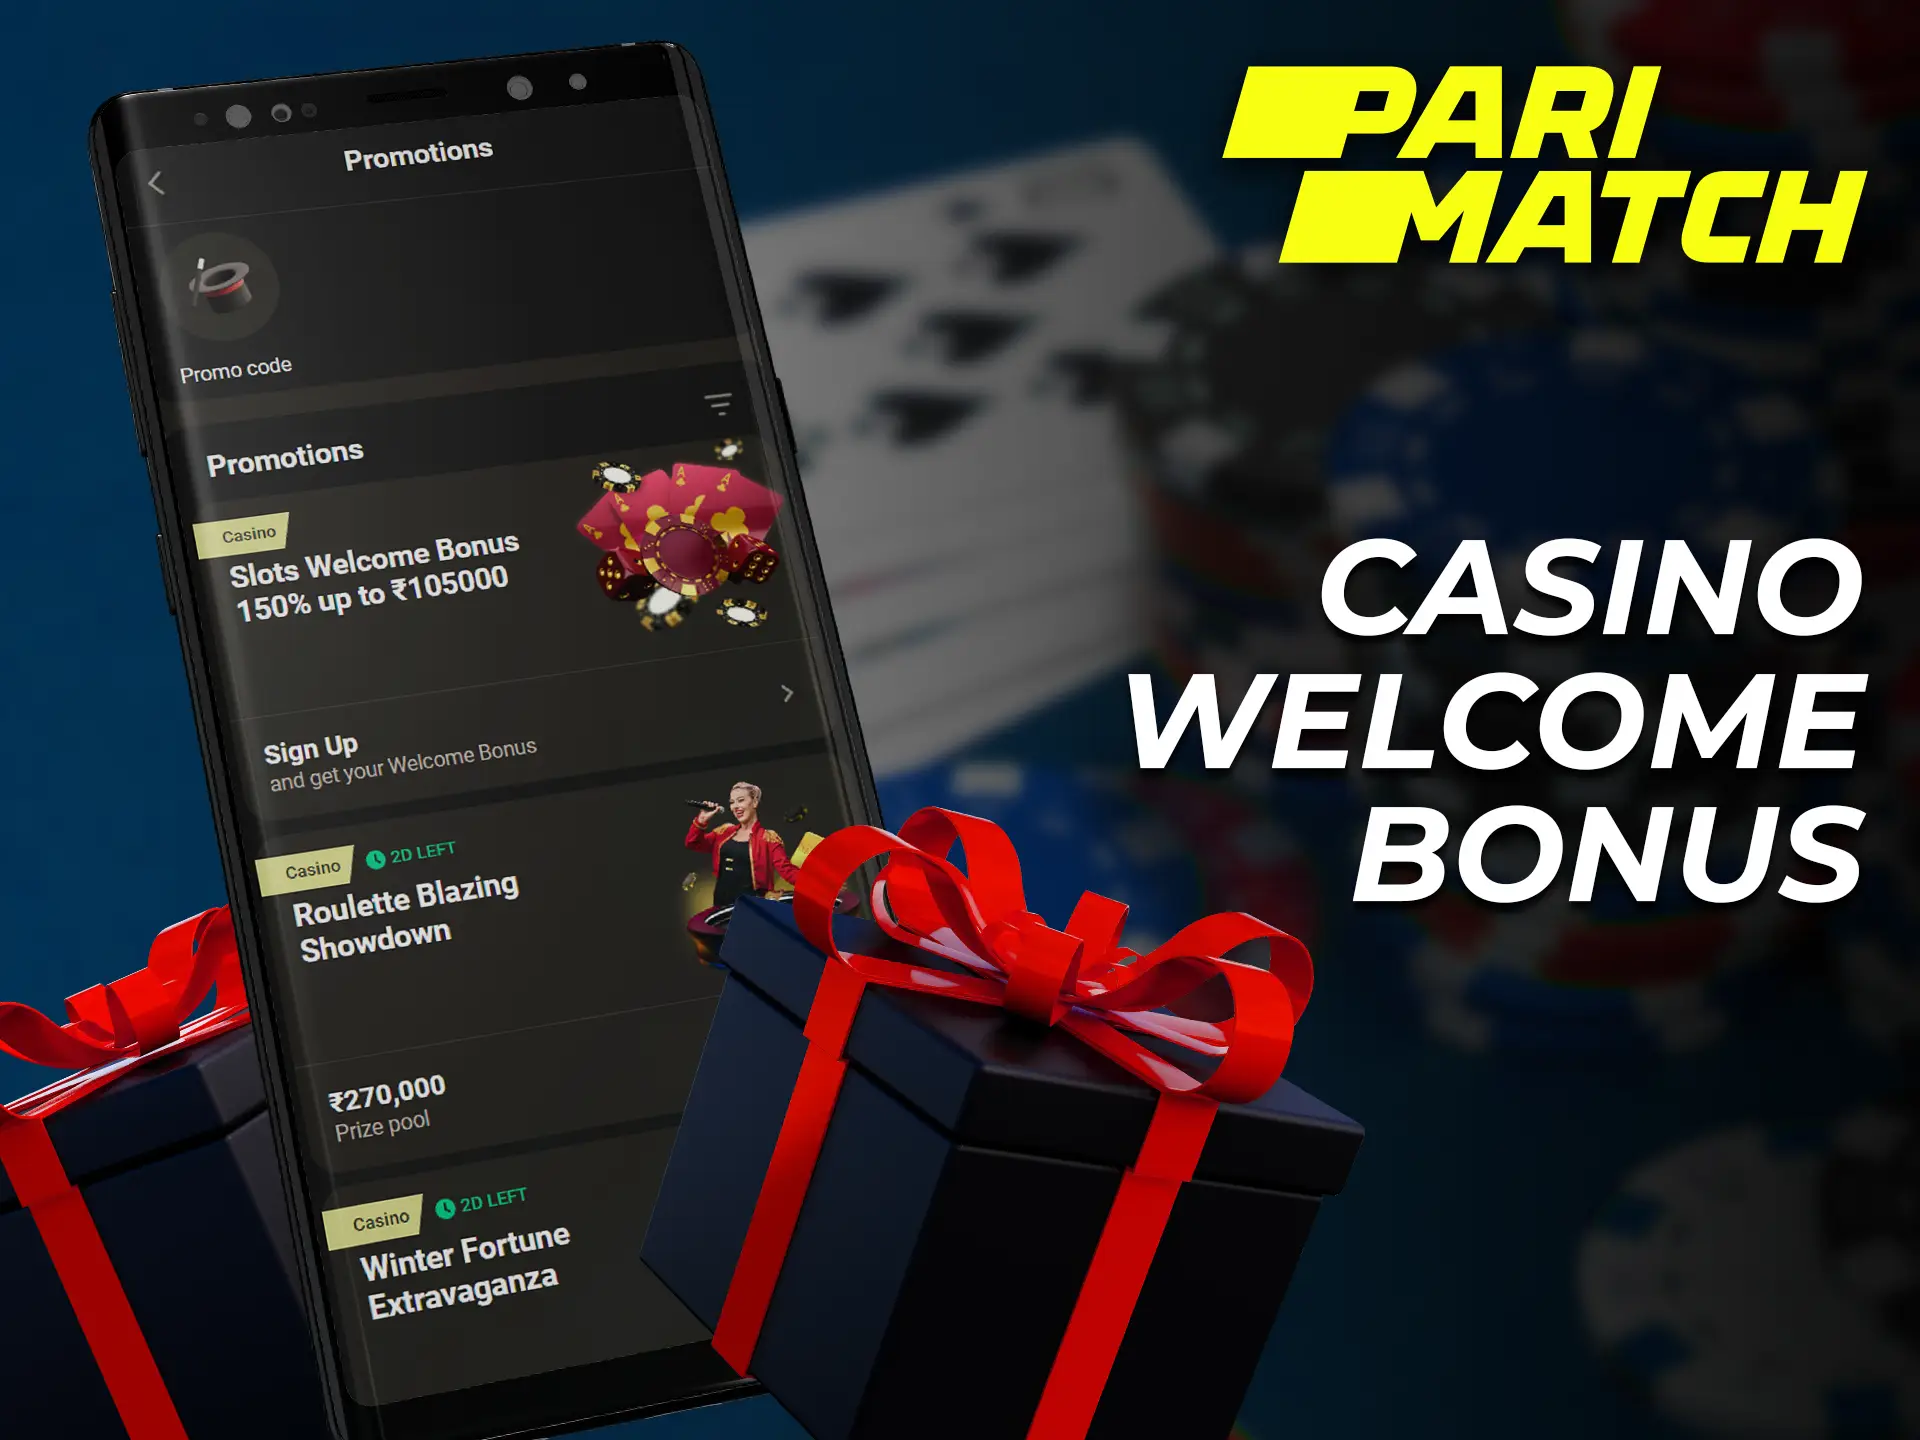 A welcome bonus of up to Rs. 105,000 is available to casino enthusiasts.